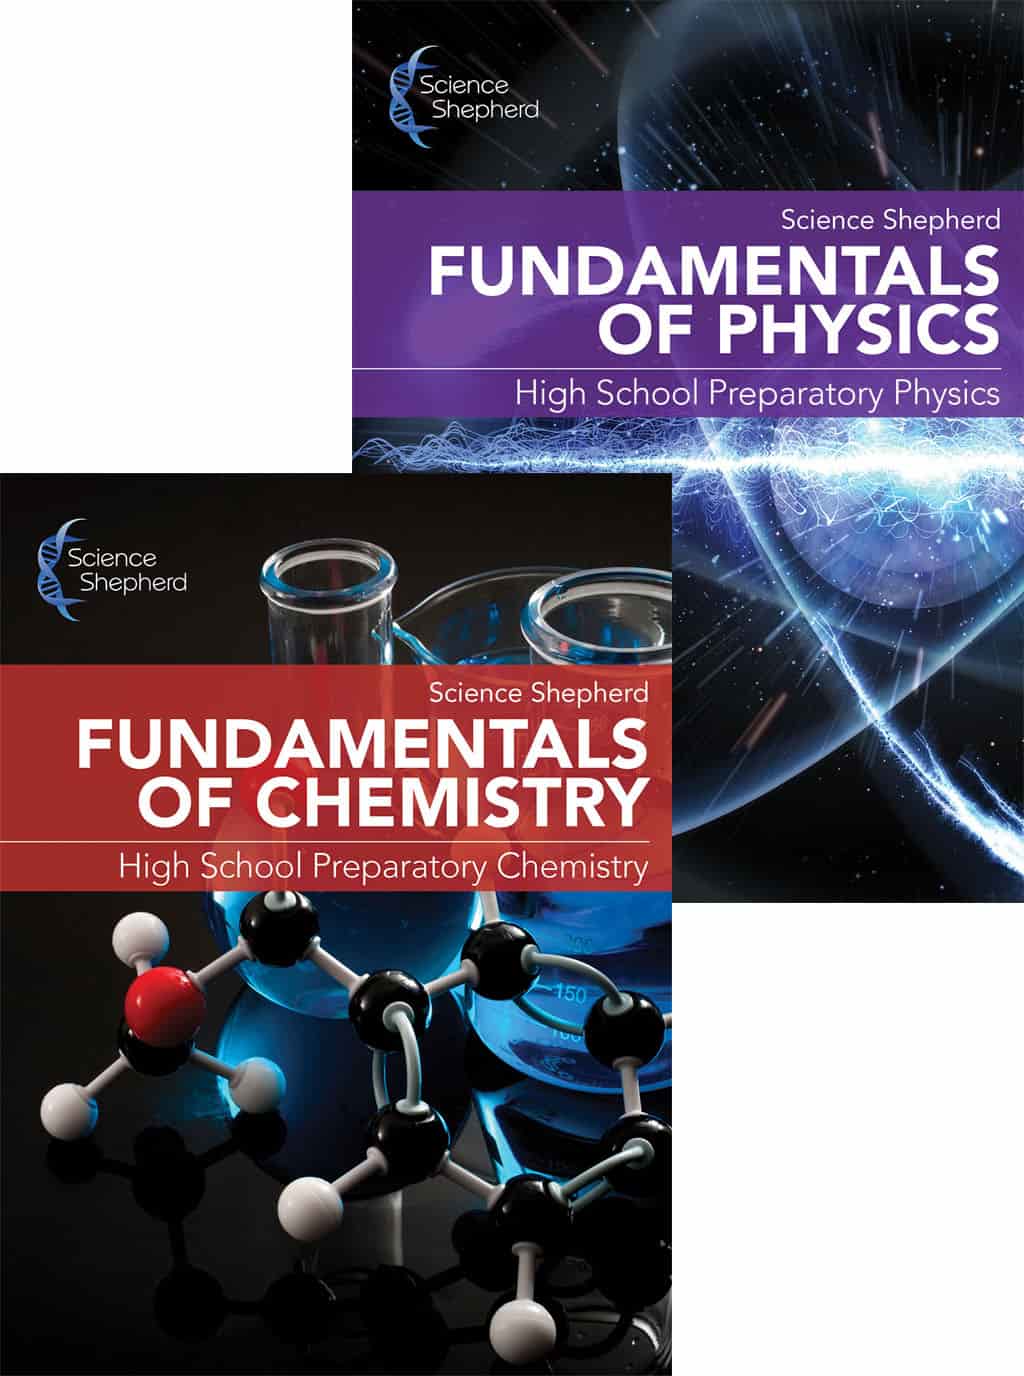 purple physical science textbook